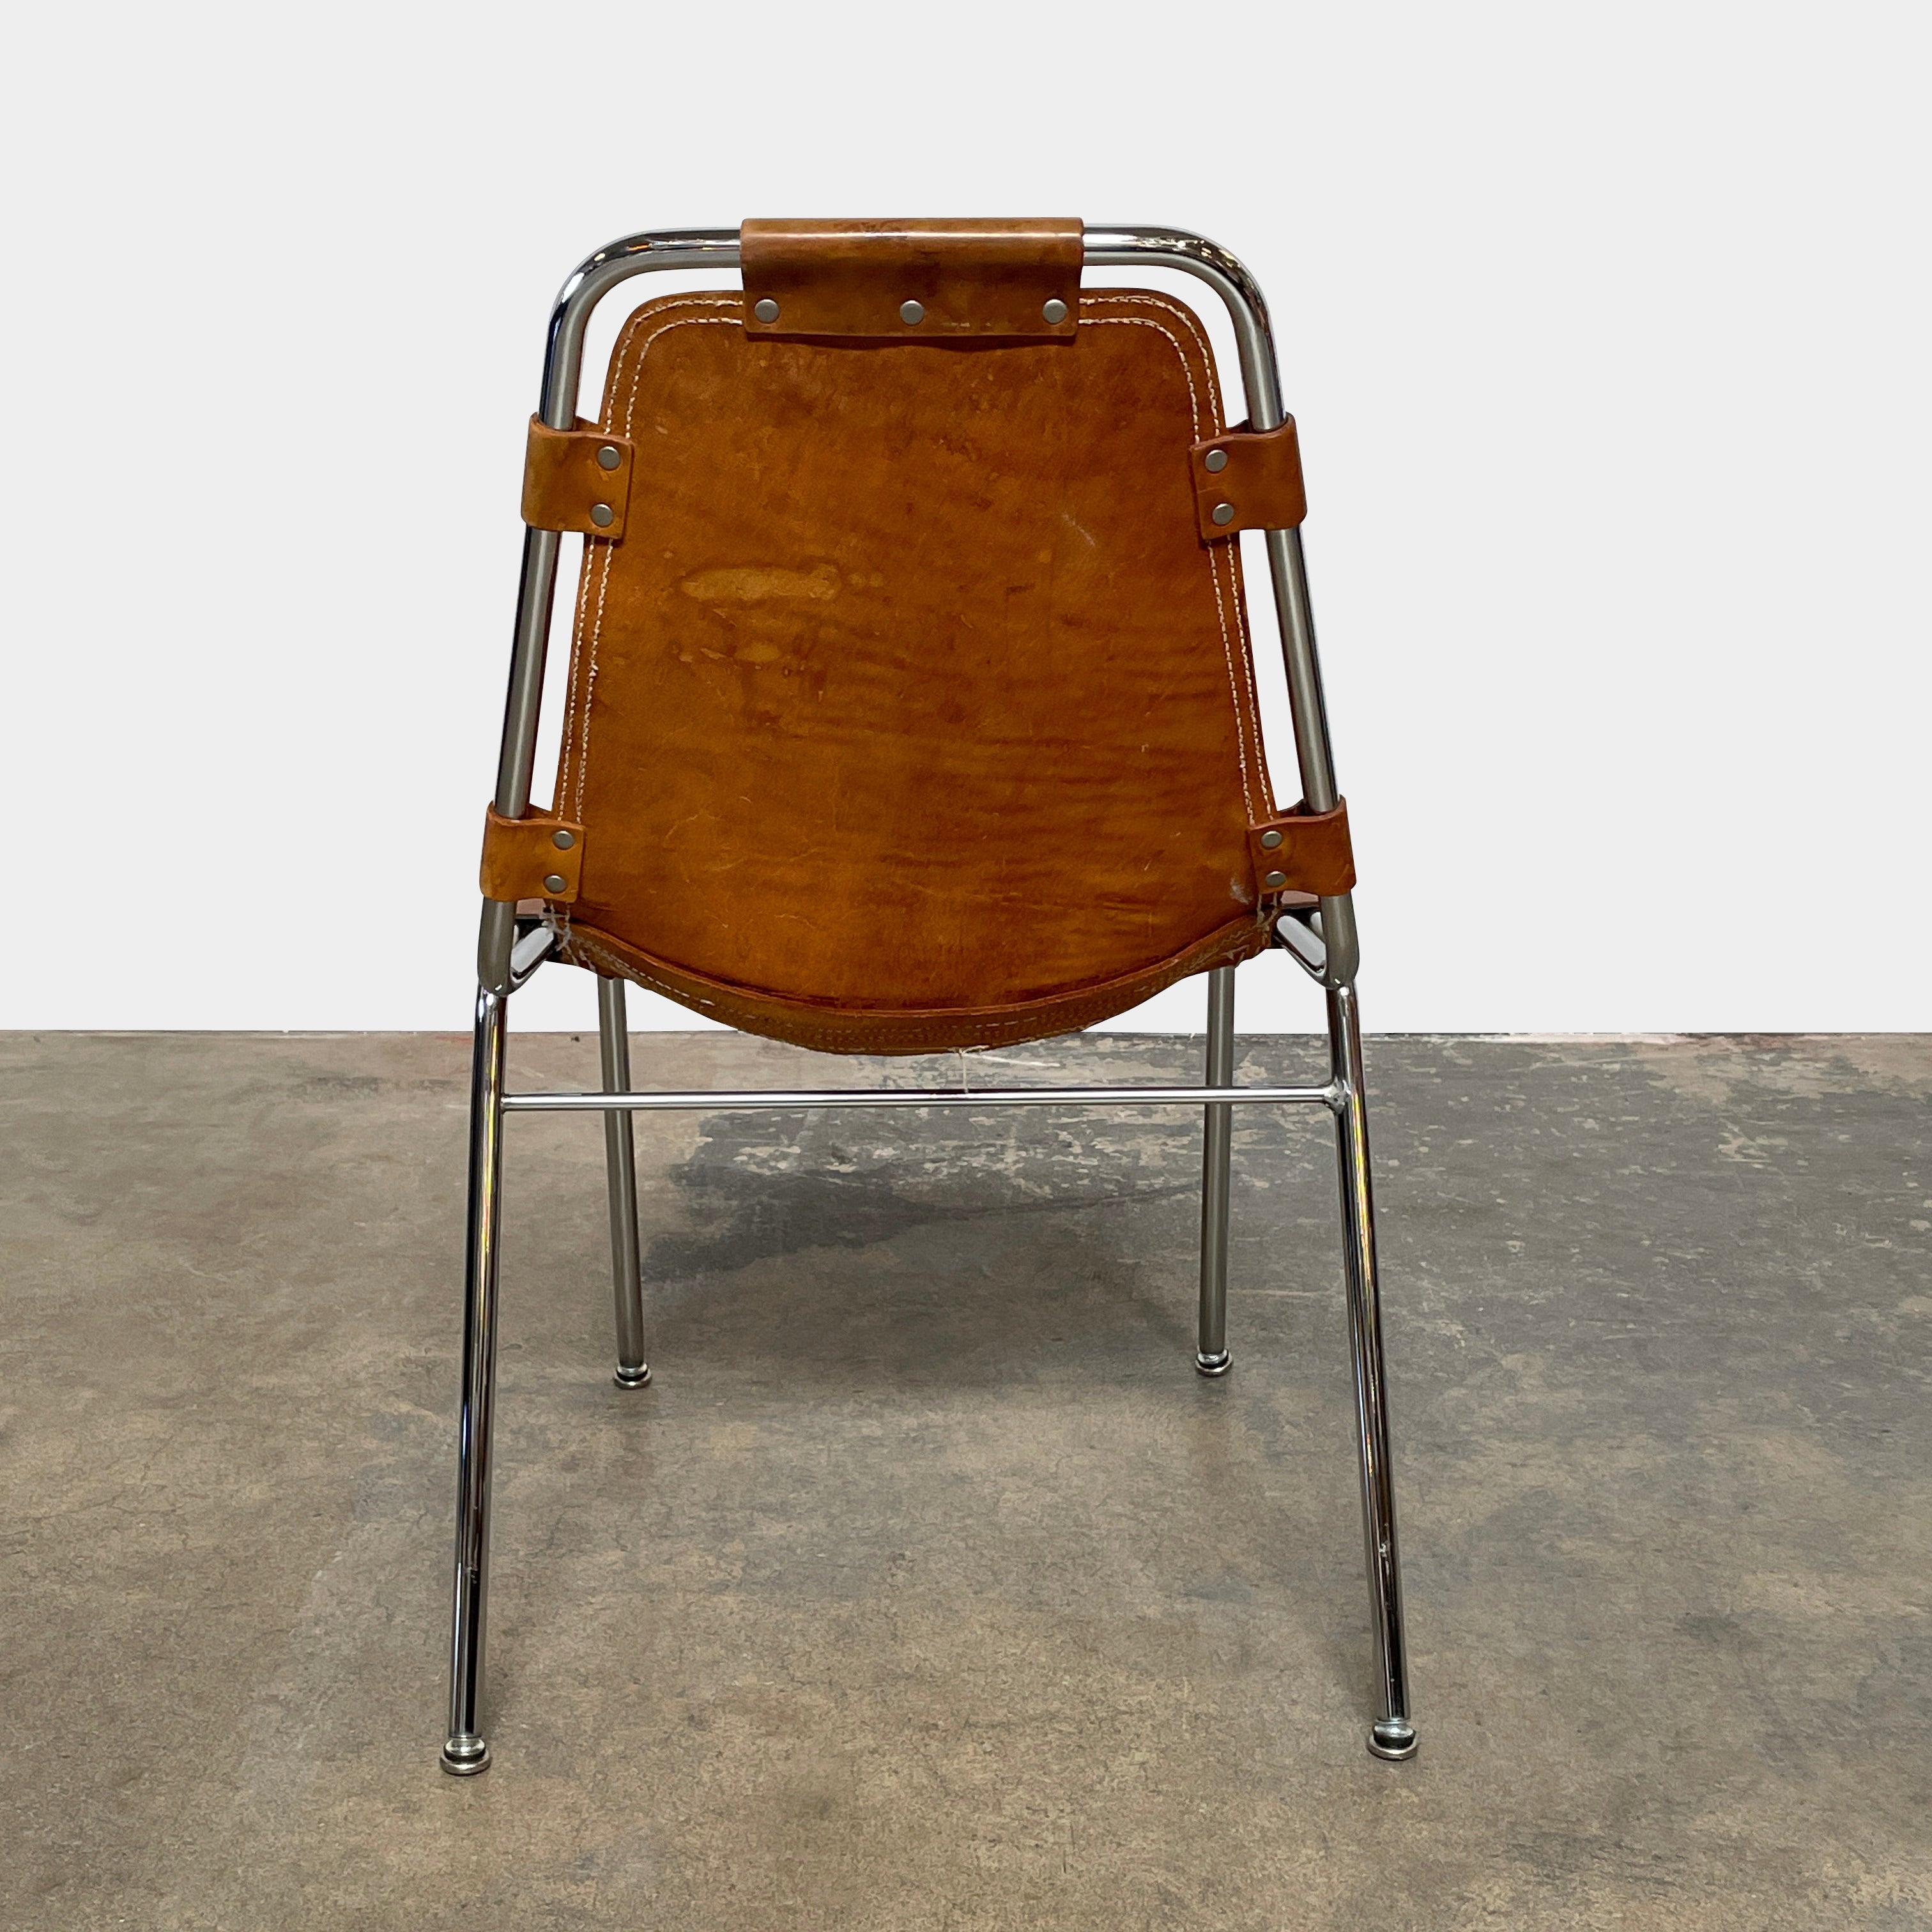 1 From 4 Charlotte Perriand Chair Model Les Arcs Bauhaus Stacking Chair